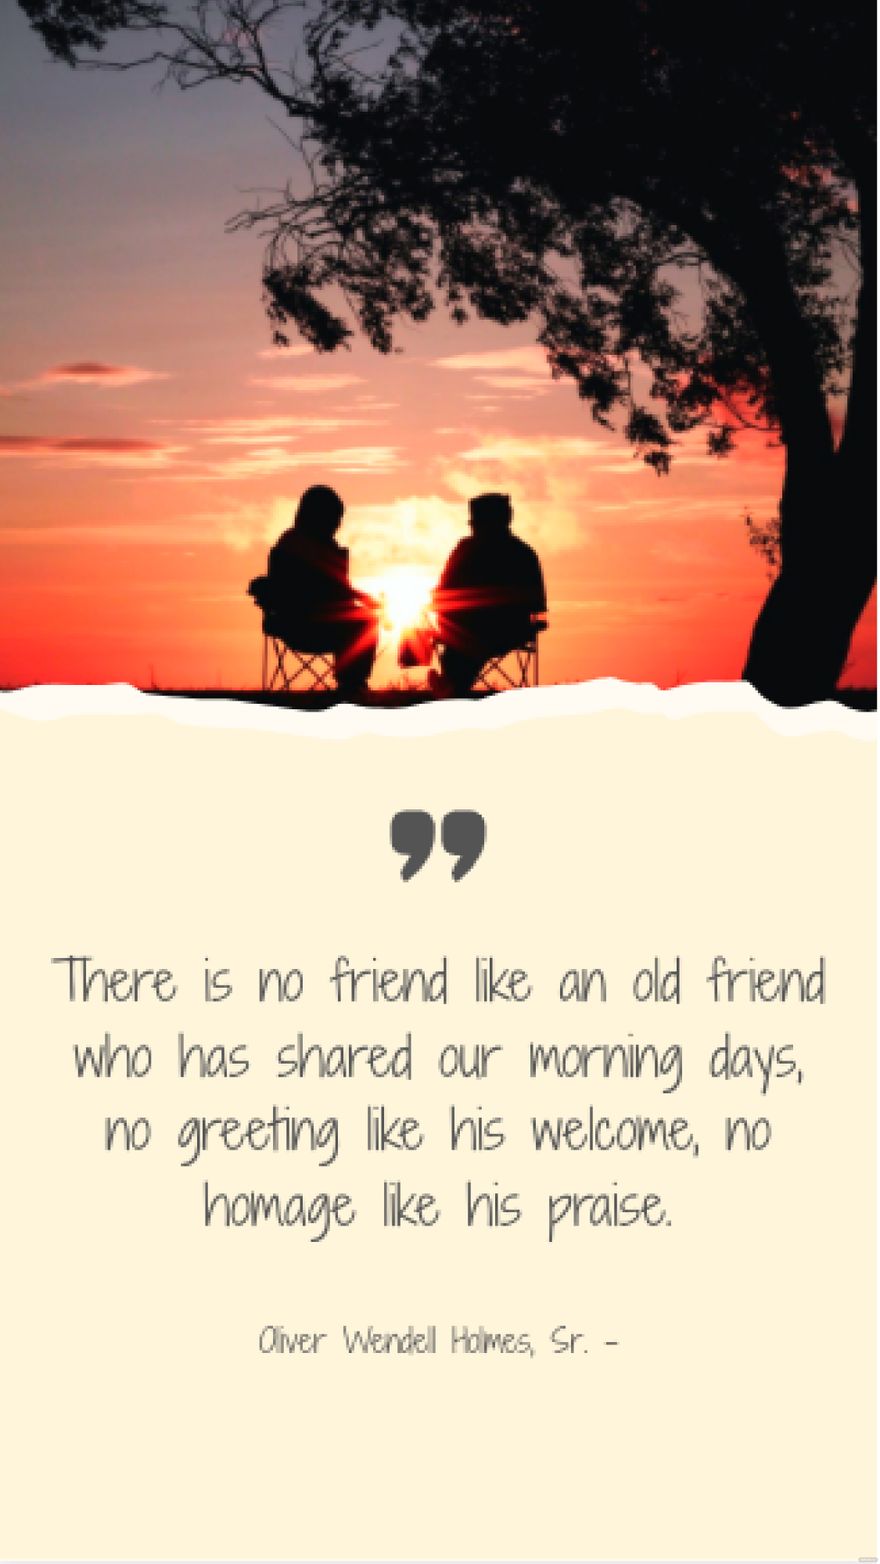 Oliver Wendell Holmes, Sr. - There is no friend like an old friend who has shared our morning days, no greeting like his welcome, no homage like his praise.